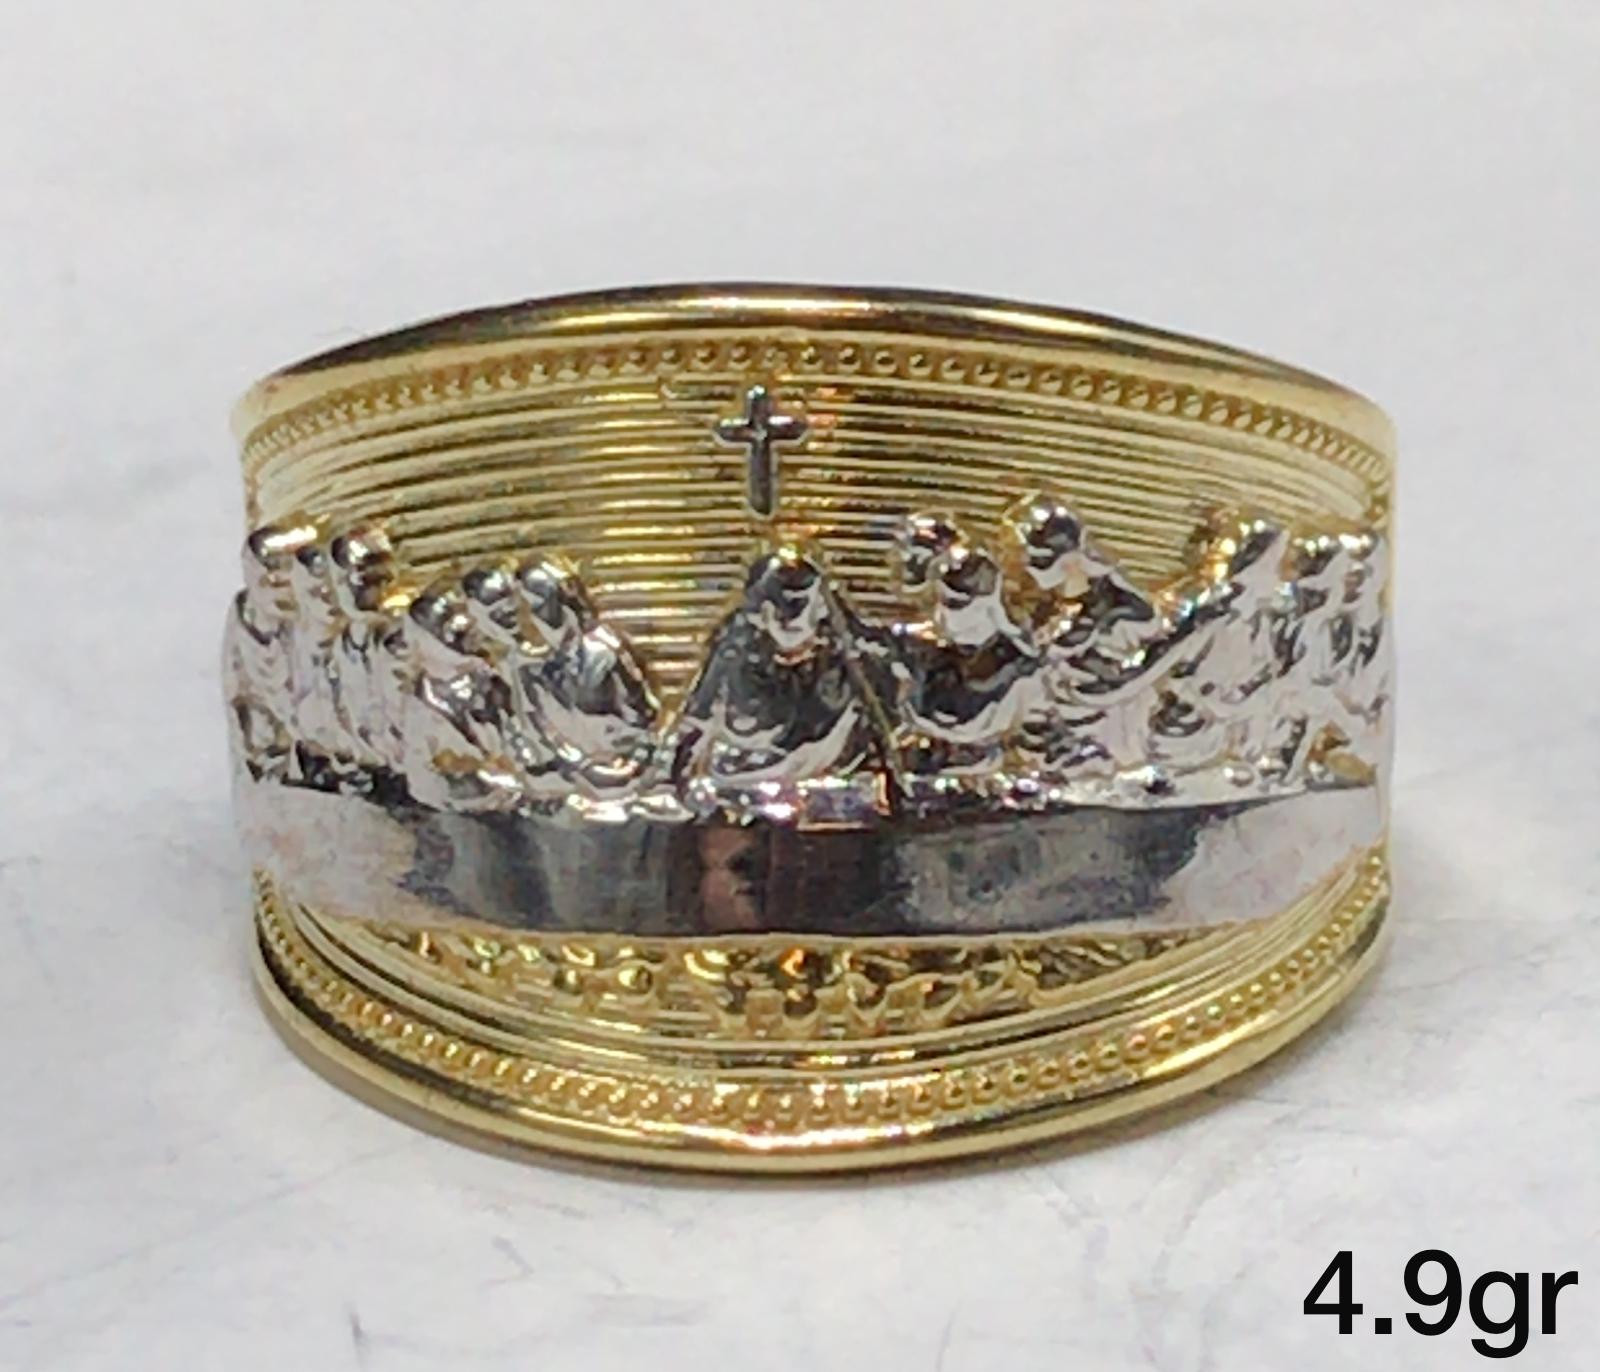 10K Gold Last Supper Ring